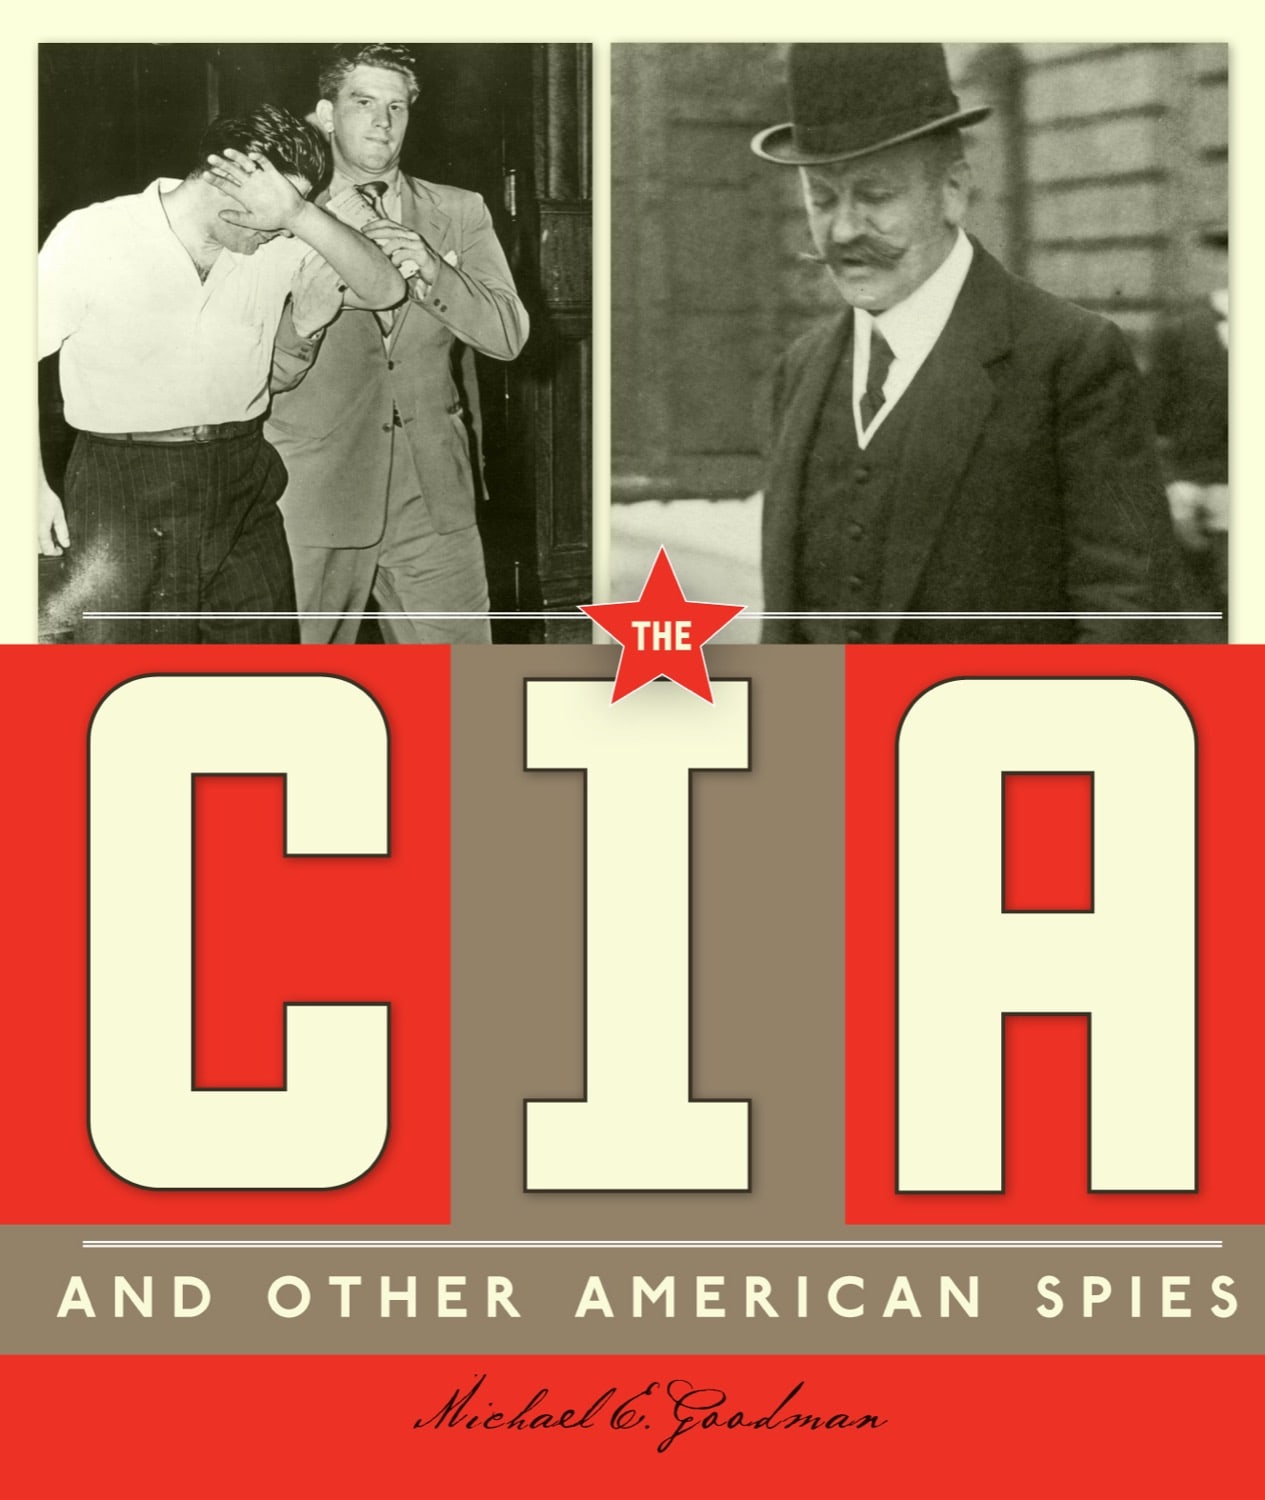 Spies around the World: CIA and Other American Spies, The